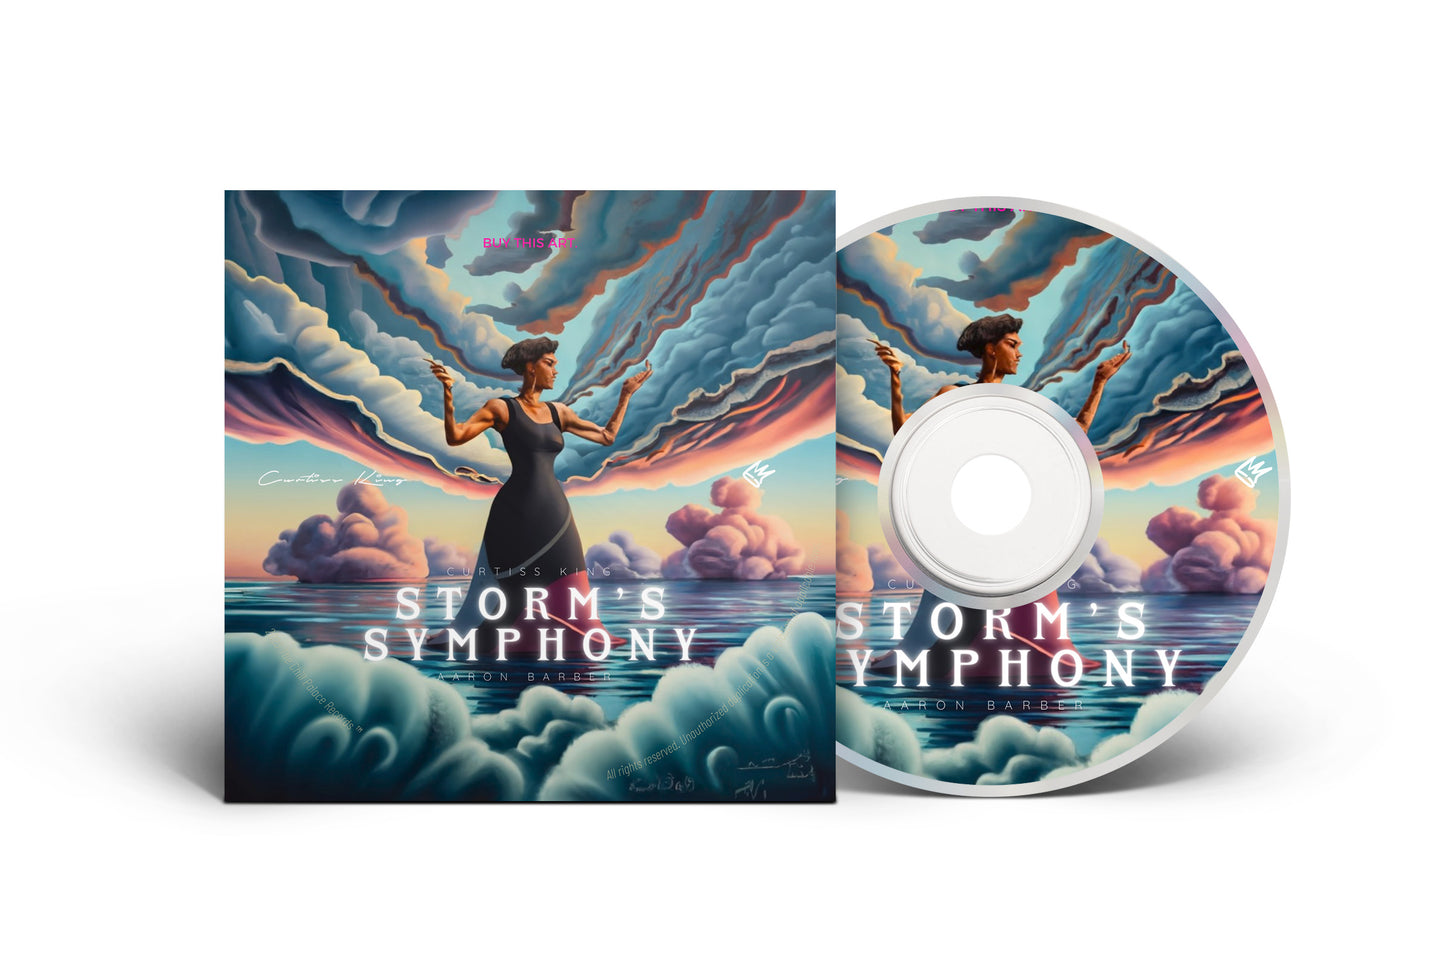 Storm's Symphony by Curtiss King & Aaron Barber